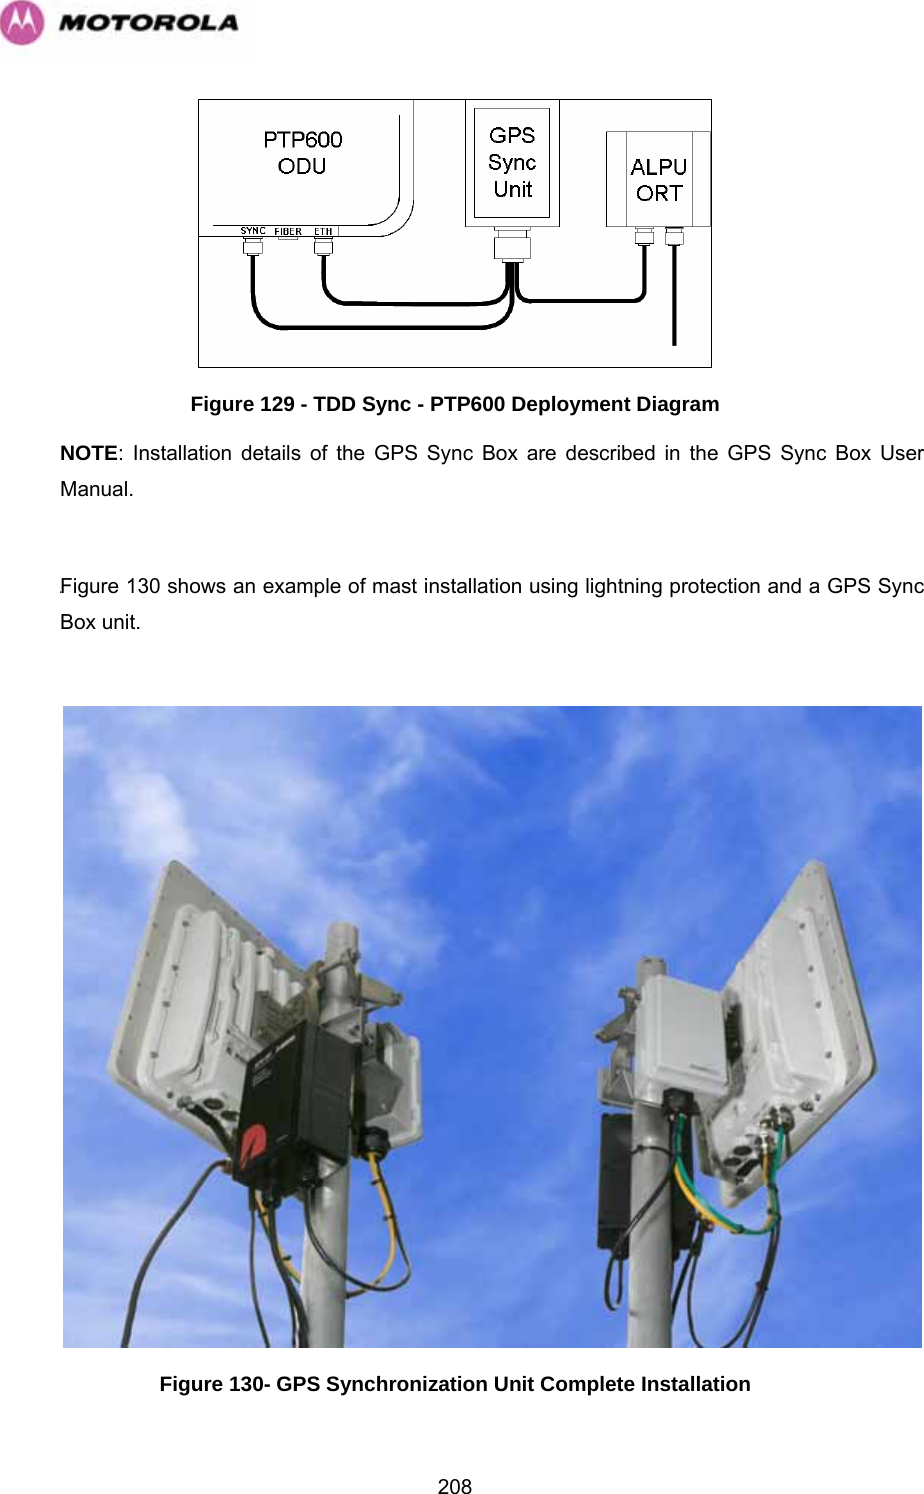   208 Figure 129 - TDD Sync - PTP600 Deployment Diagram NOTE: Installation details of the GPS Sync Box are described in the GPS Sync Box User Manual.   1219HFigure 130 shows an example of mast installation using lightning protection and a GPS Sync Box unit.   Figure 130- GPS Synchronization Unit Complete Installation 